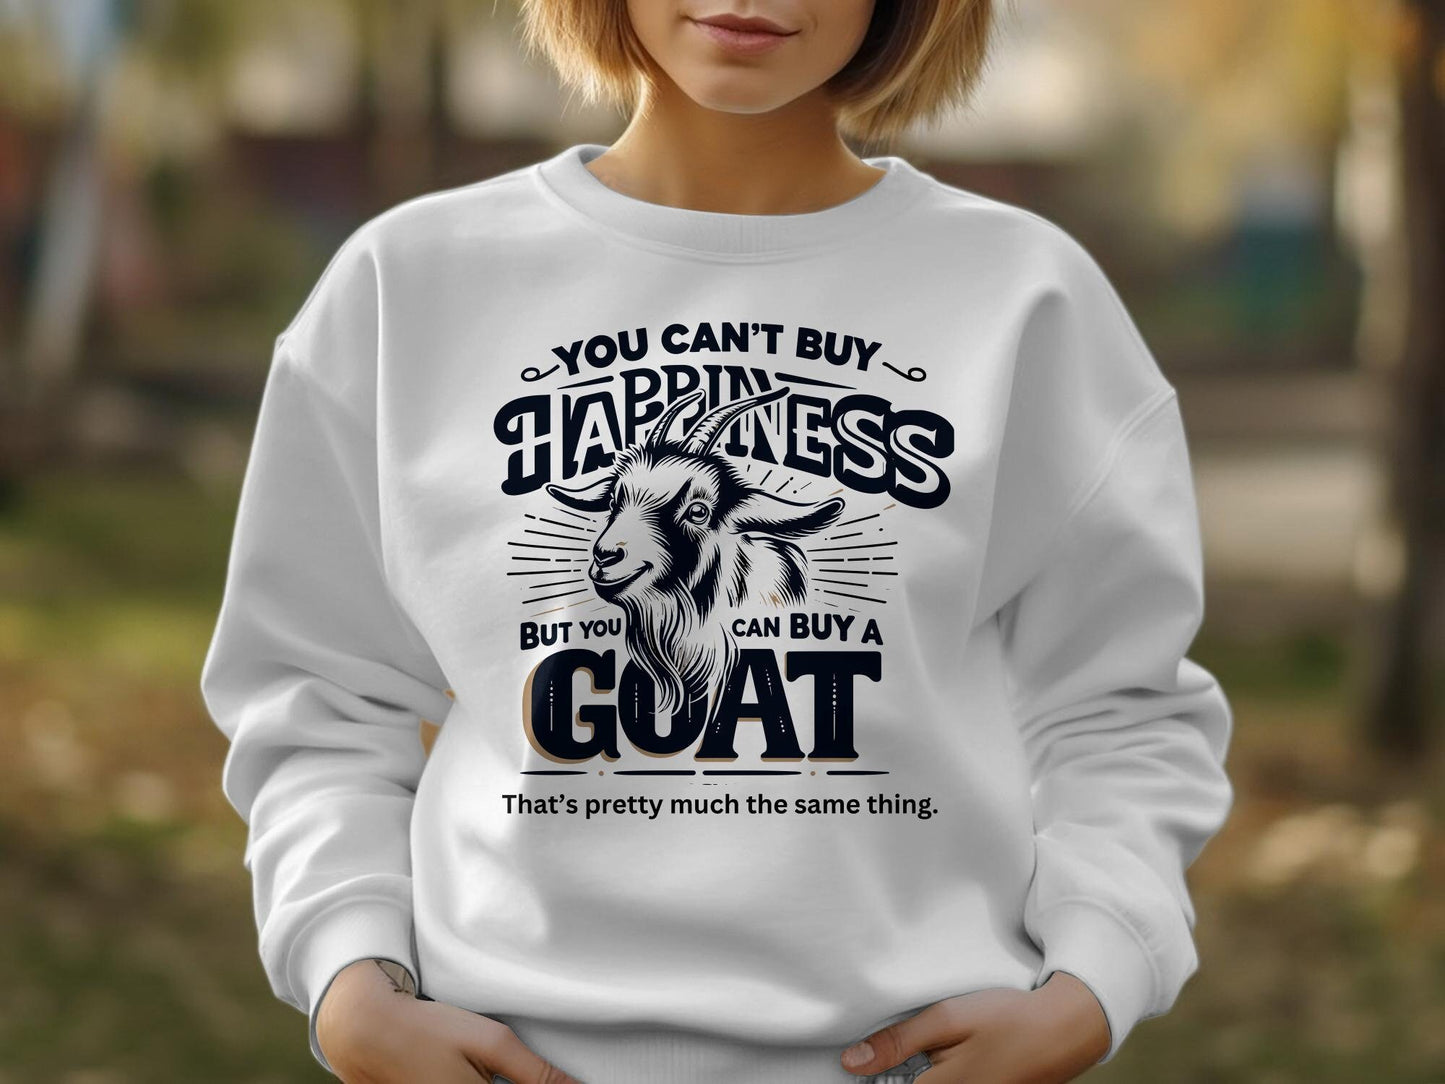 You Can't Buy Happiness, But You Can Buy a Goat - Pretty Much the Same Thing Shirt, Farm T-Shirt, Animal Lover Shirt, Goat Shirt Gift